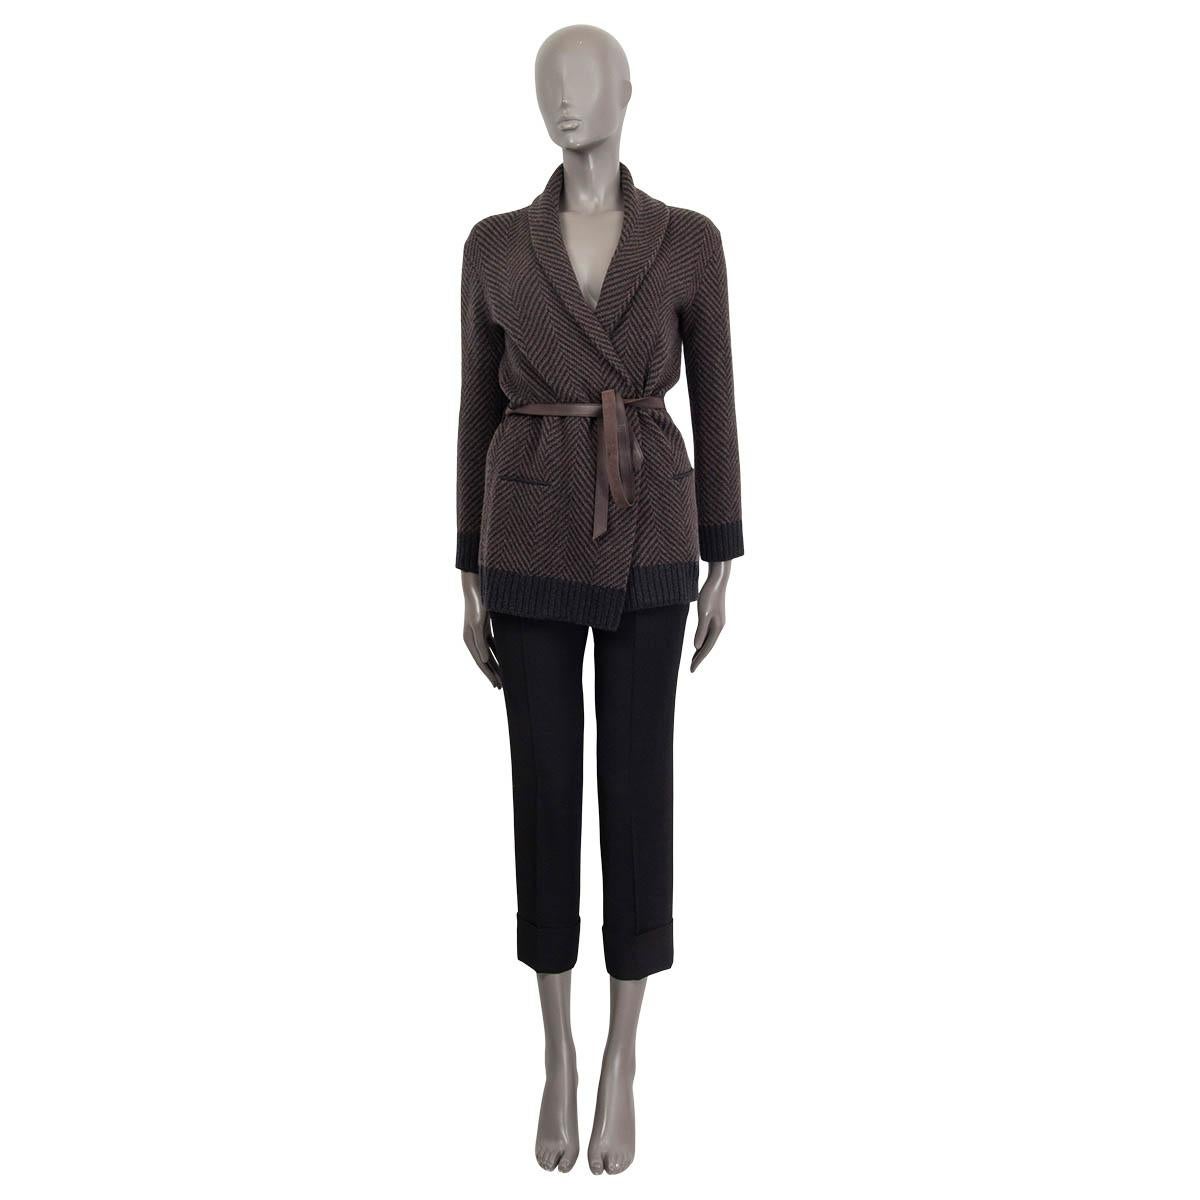 100% authentic Loro Piana open knit cashmere in black and brown baby cashmere (100%). Features a shawl collar, two sewn shut slit pockets on the front and a detachable belt in brown lambskin (100%). Unlined. Has been worn once and is in excellent